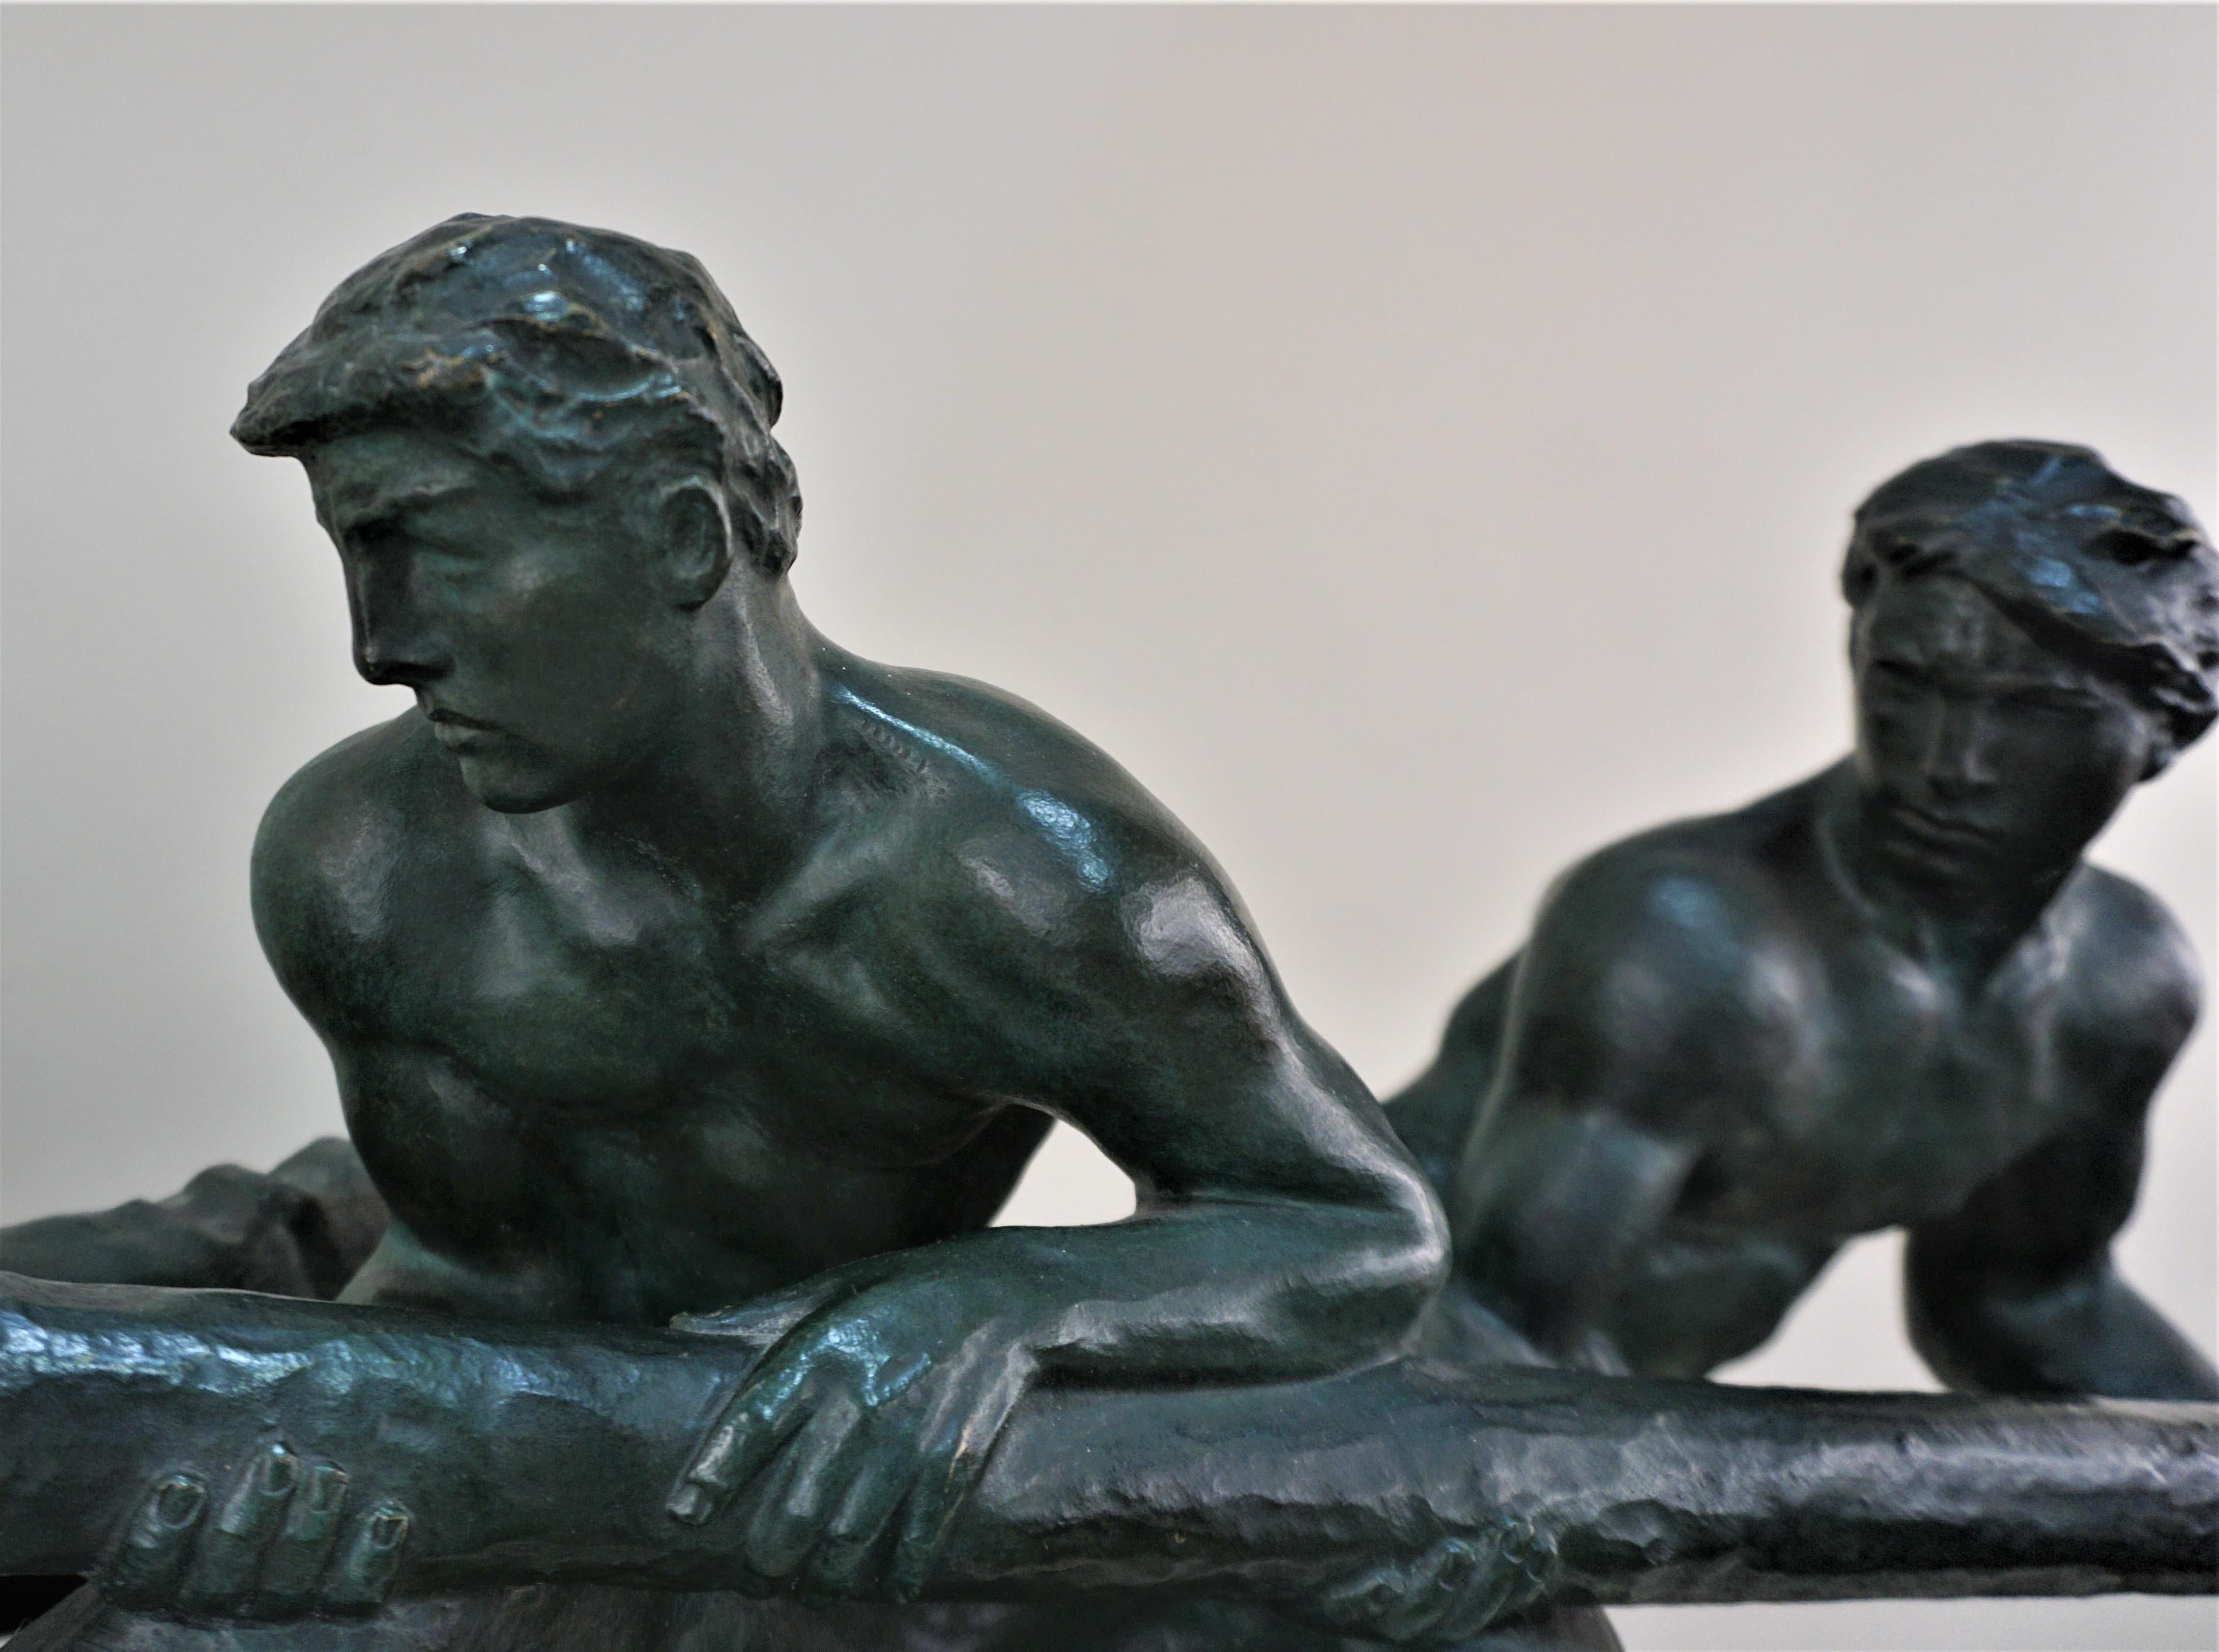 A bronze sculpture two men steering signed by Hungarian - French sculptor Alexandre Kelety.
Foundry mark 